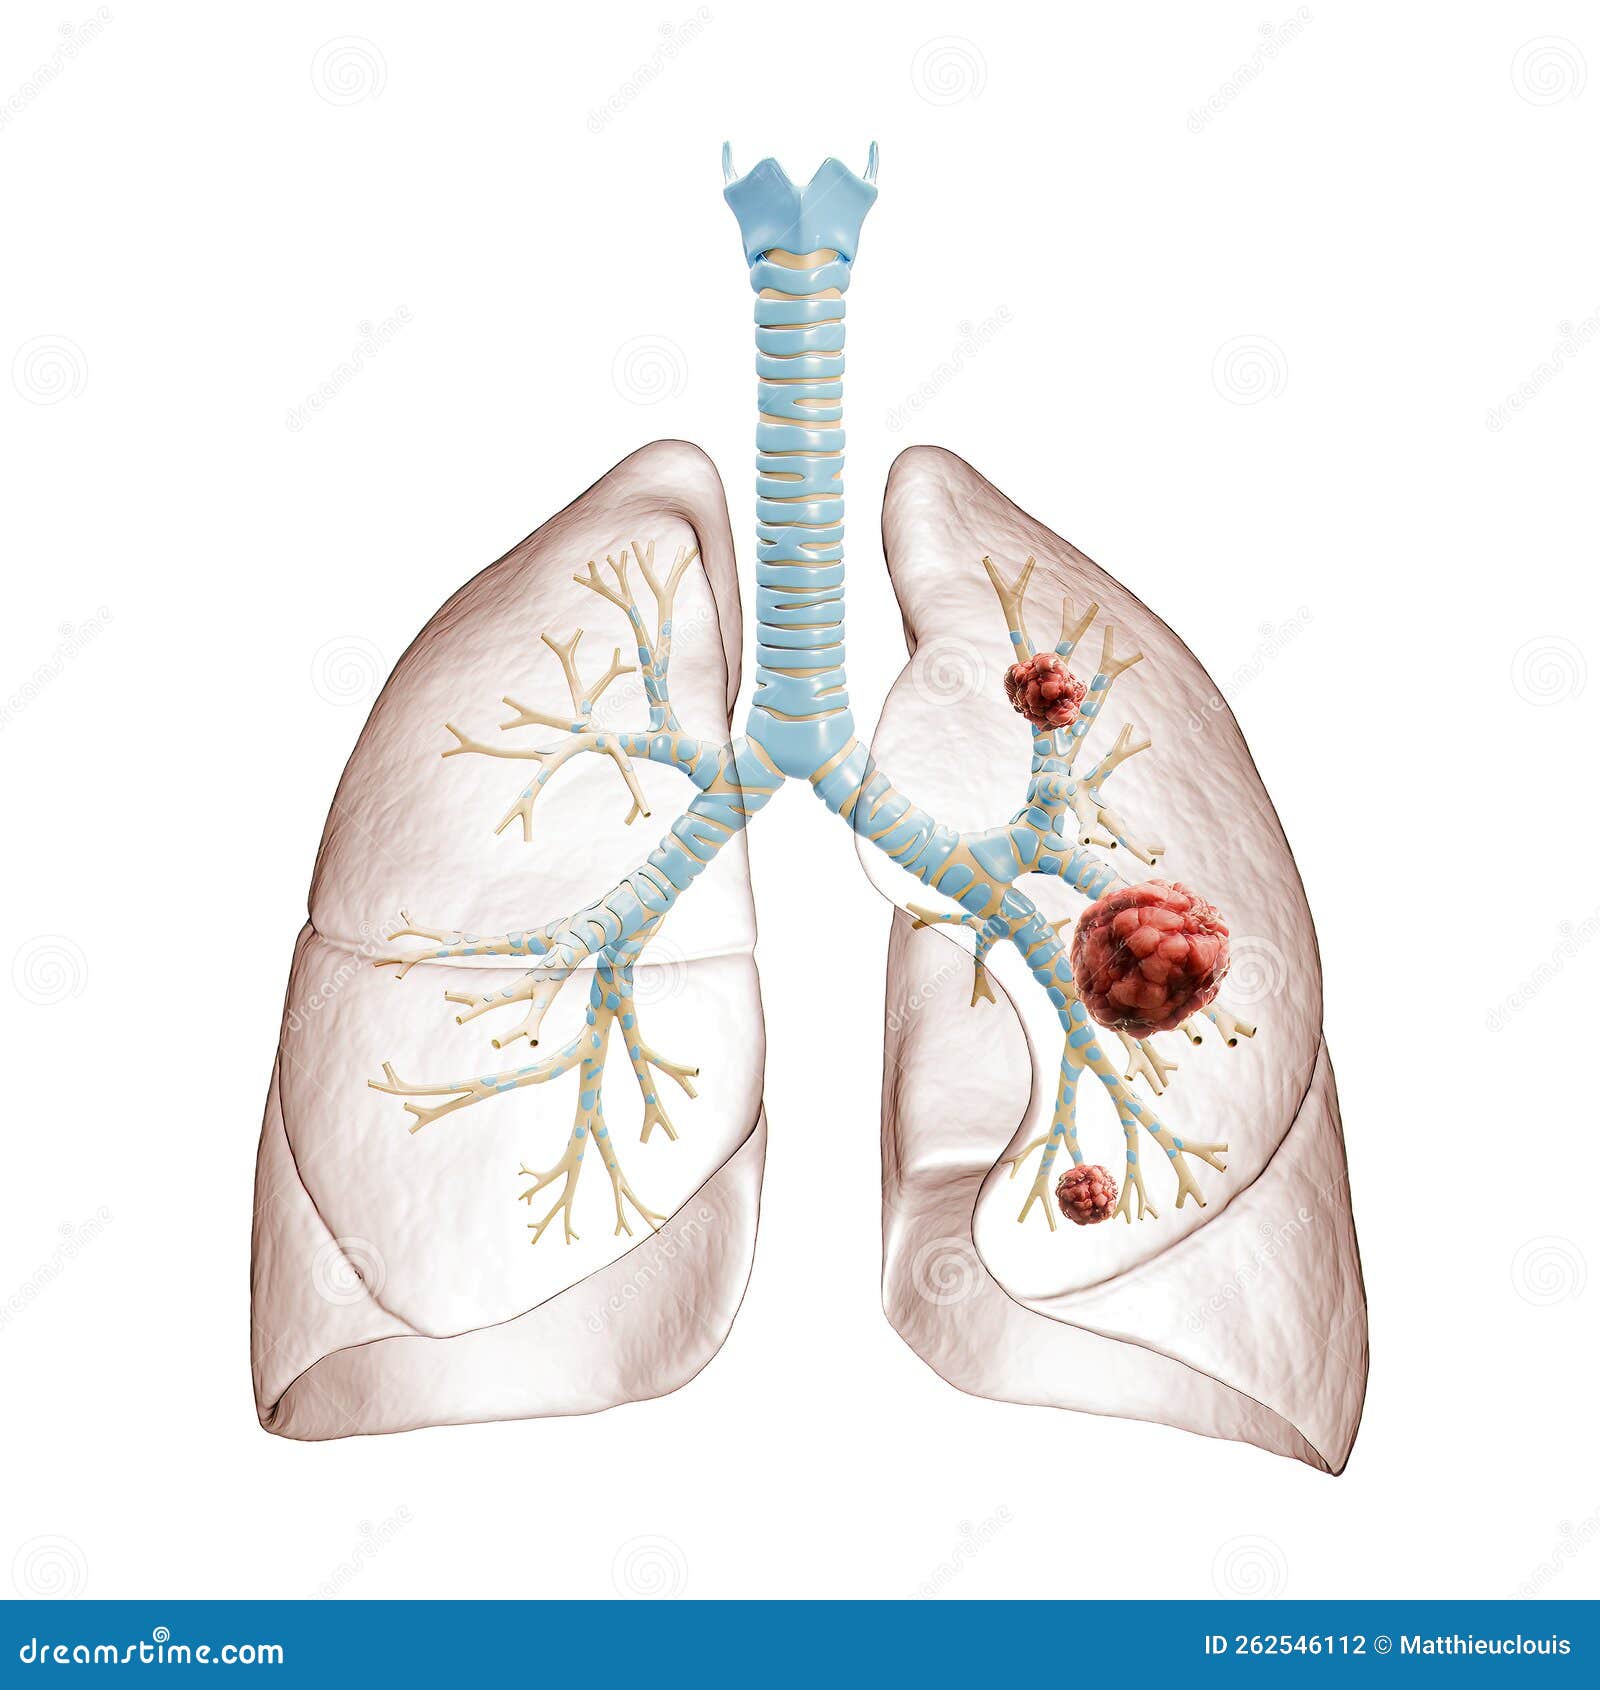 Lung Cancer Or Carcinoma 3d Rendering Illustration Bronchial Tree And